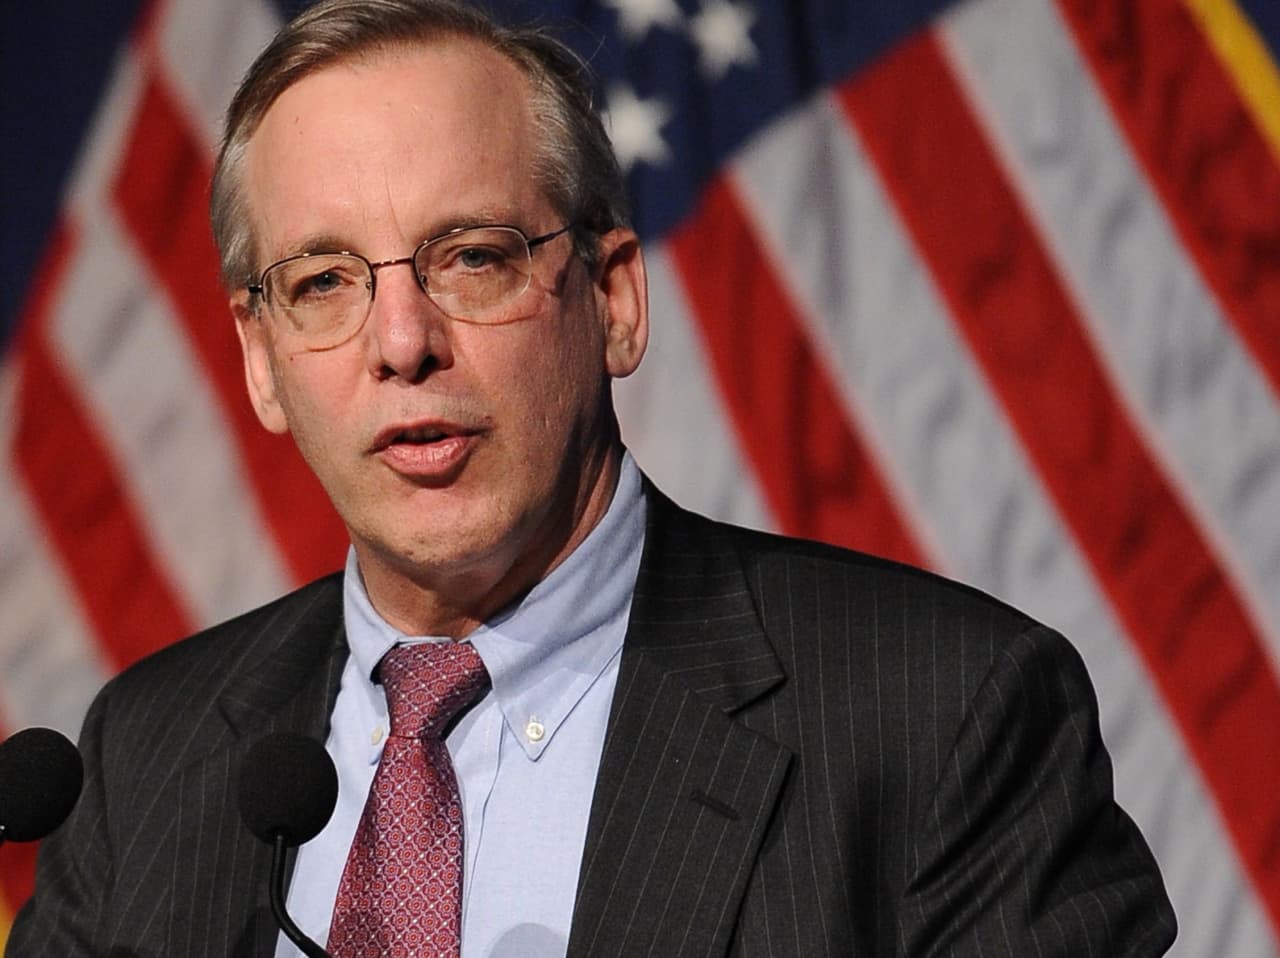 Former Fed official Dudley backs July rate cut, worries labor market weakness might gather steam